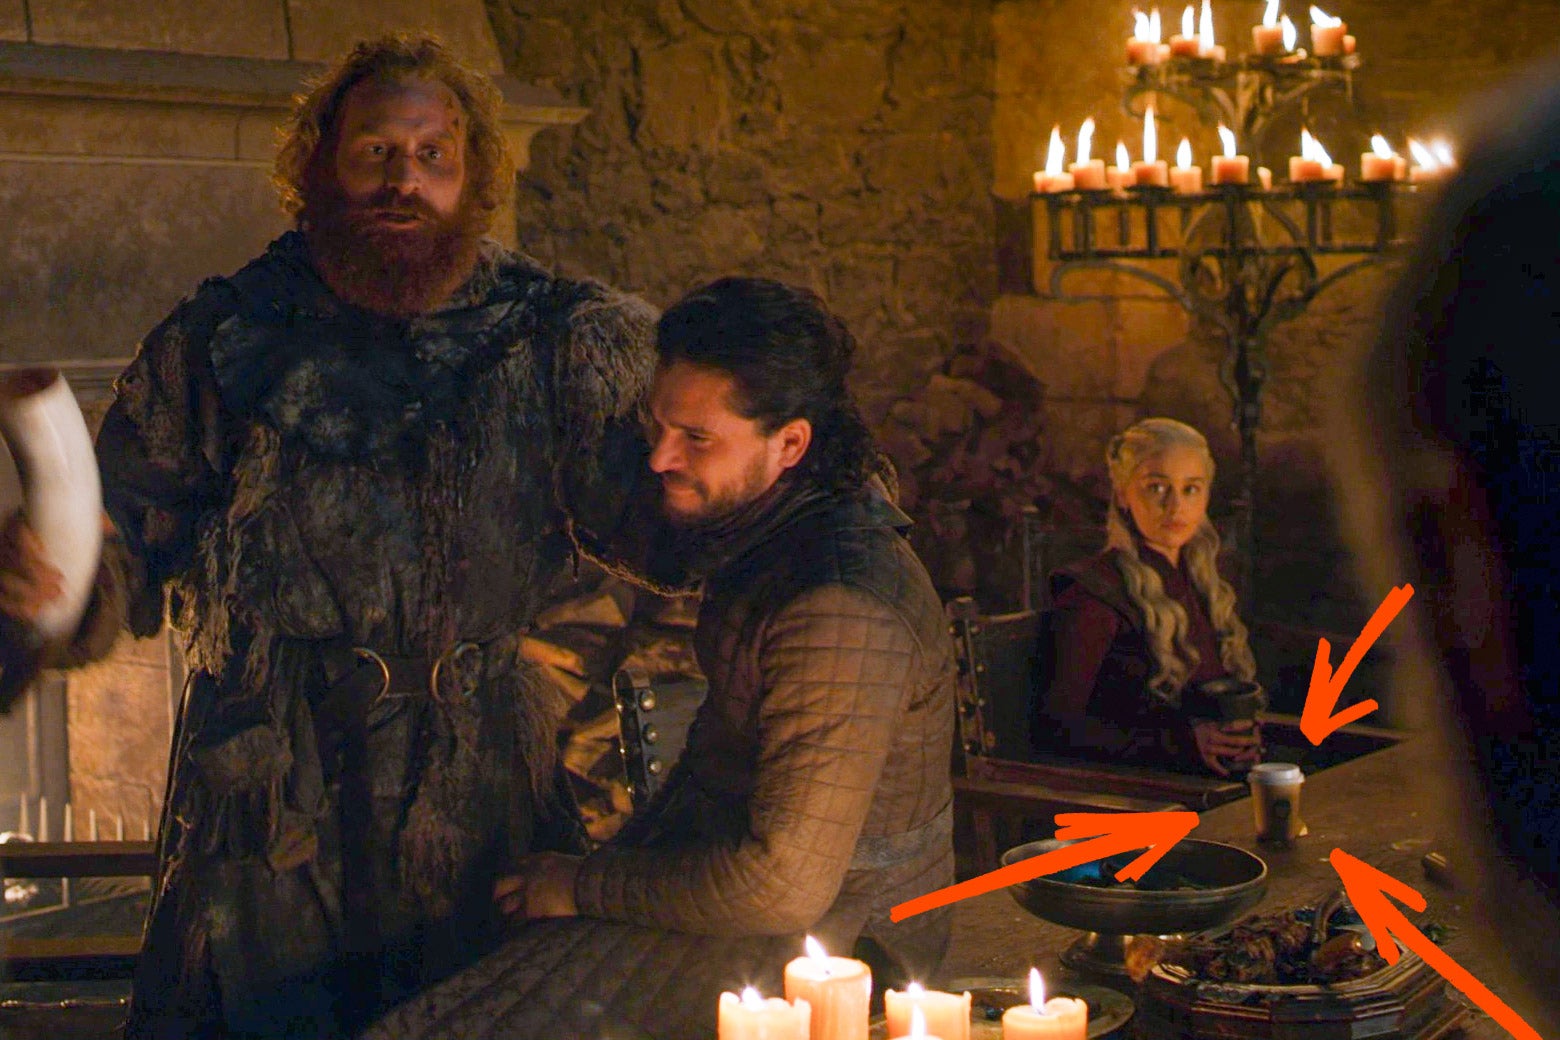 The same still from Game of Thrones Season 8 Episode 4, with red arrows pointing out the disposable coffee cup.